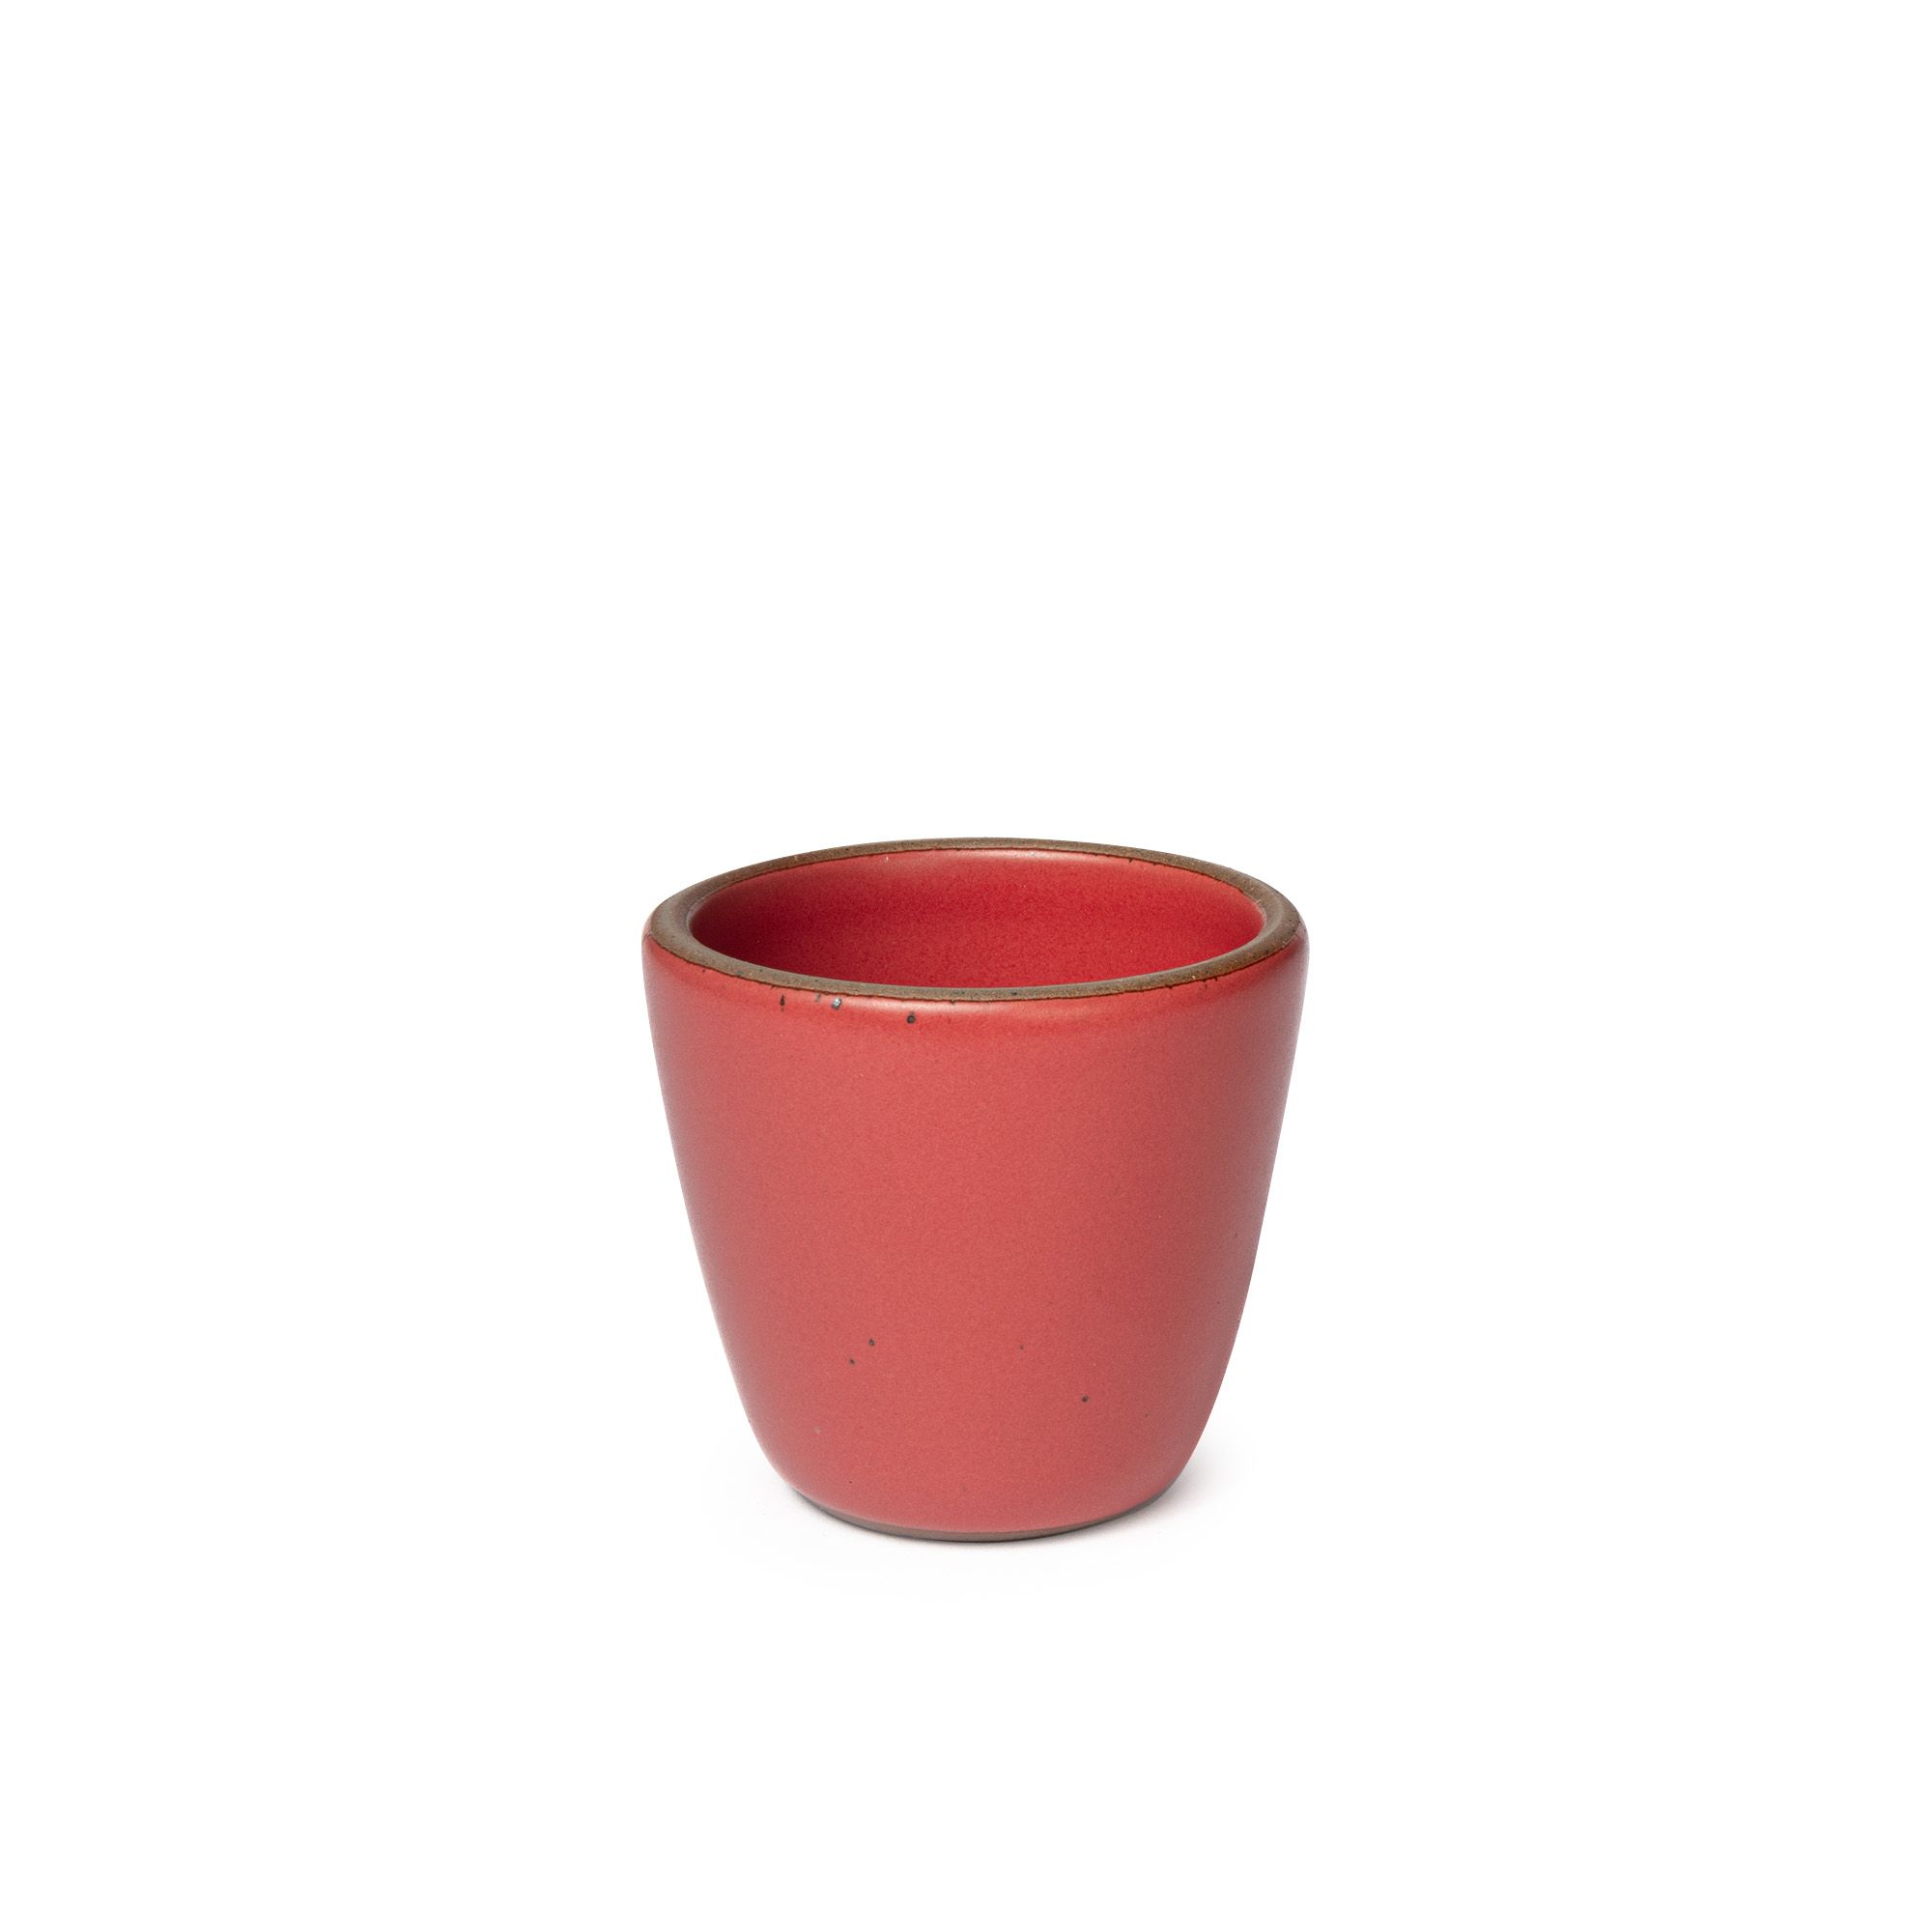 A short cup that tapers out to get wider at the top in a bold red color featuring iron speckles